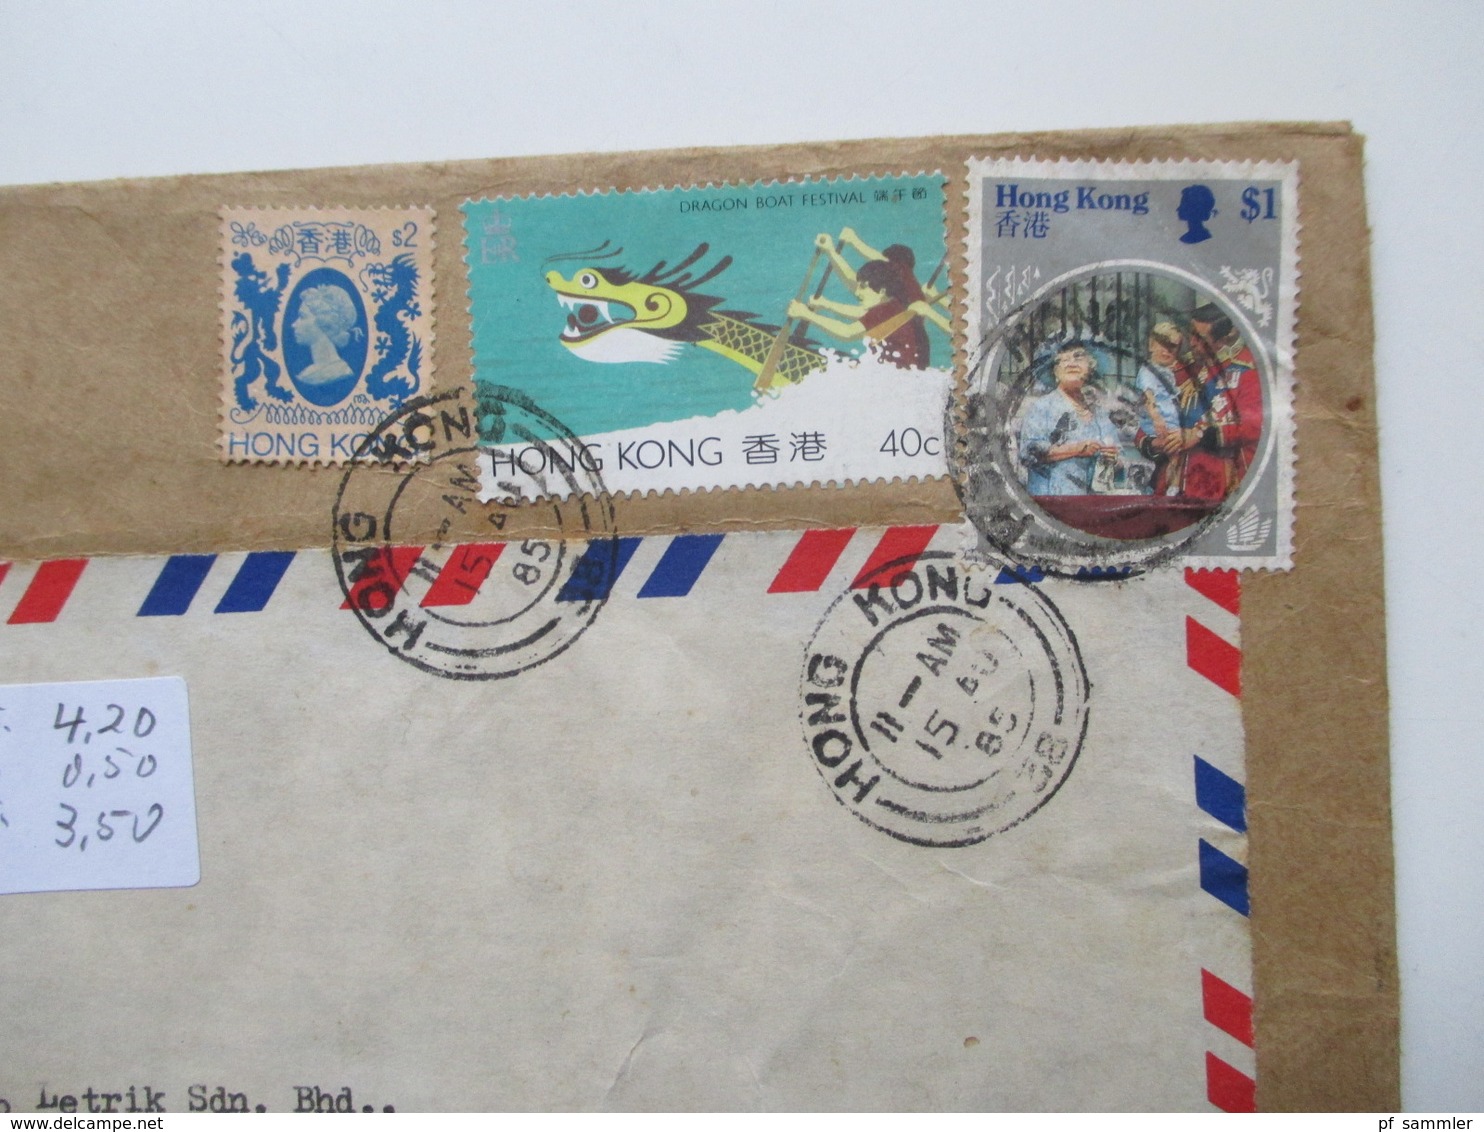 Hong Kong 1985 Air Mail Firmenbrief Universal Trading Corporation Printed Matter Nach Penang Malaysia  No Commercial Val - Covers & Documents